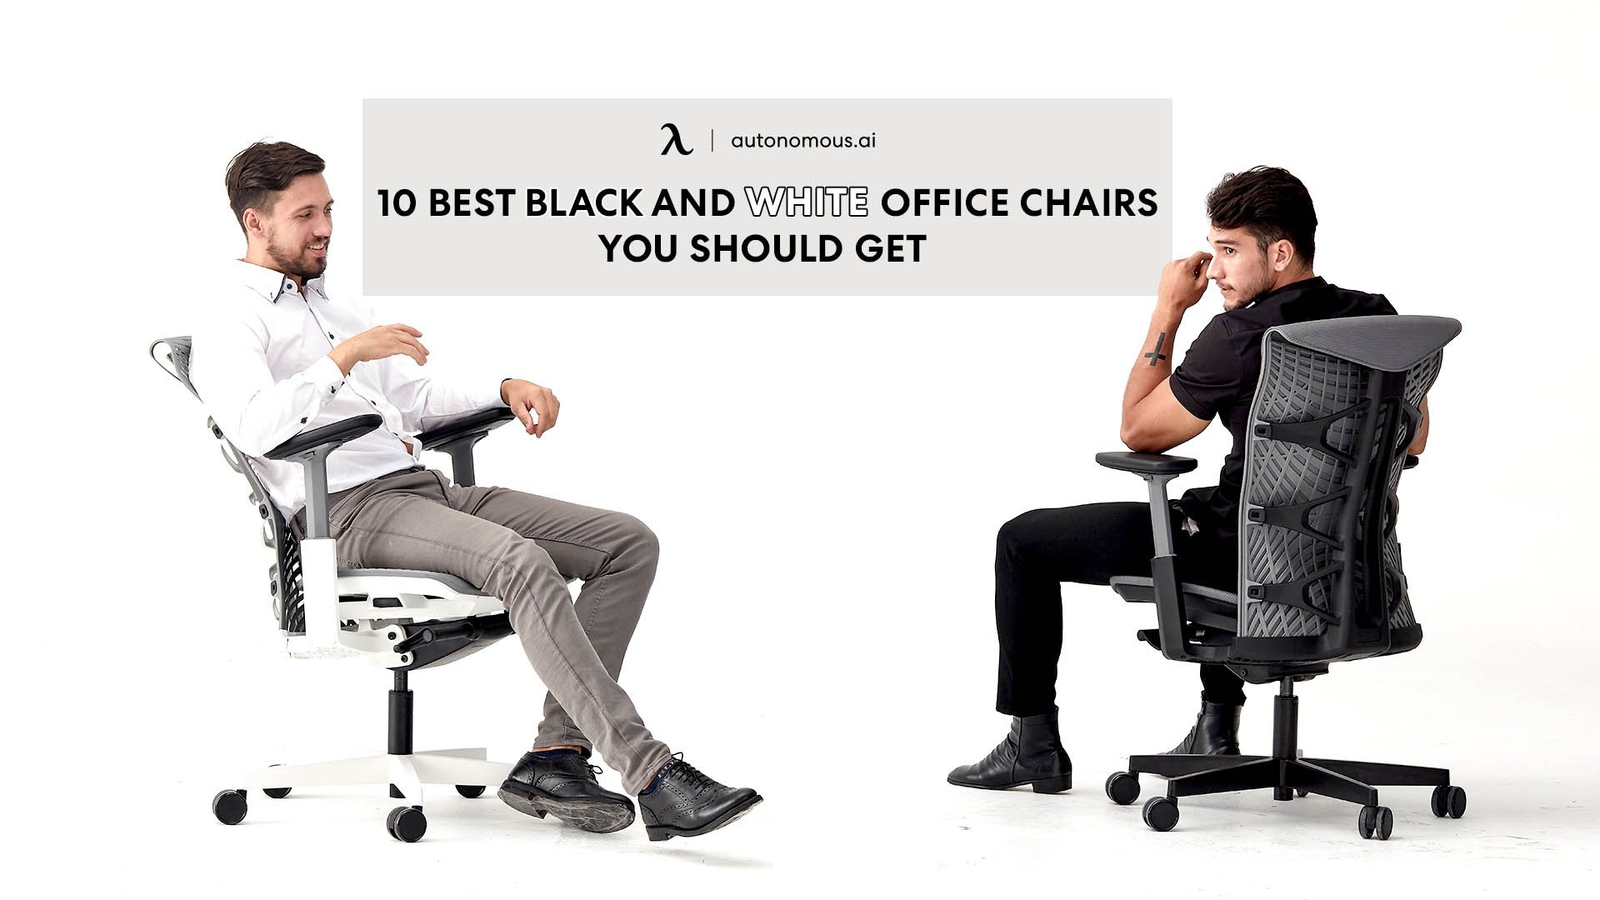 10 Best Black and White Office Chairs You Should Get